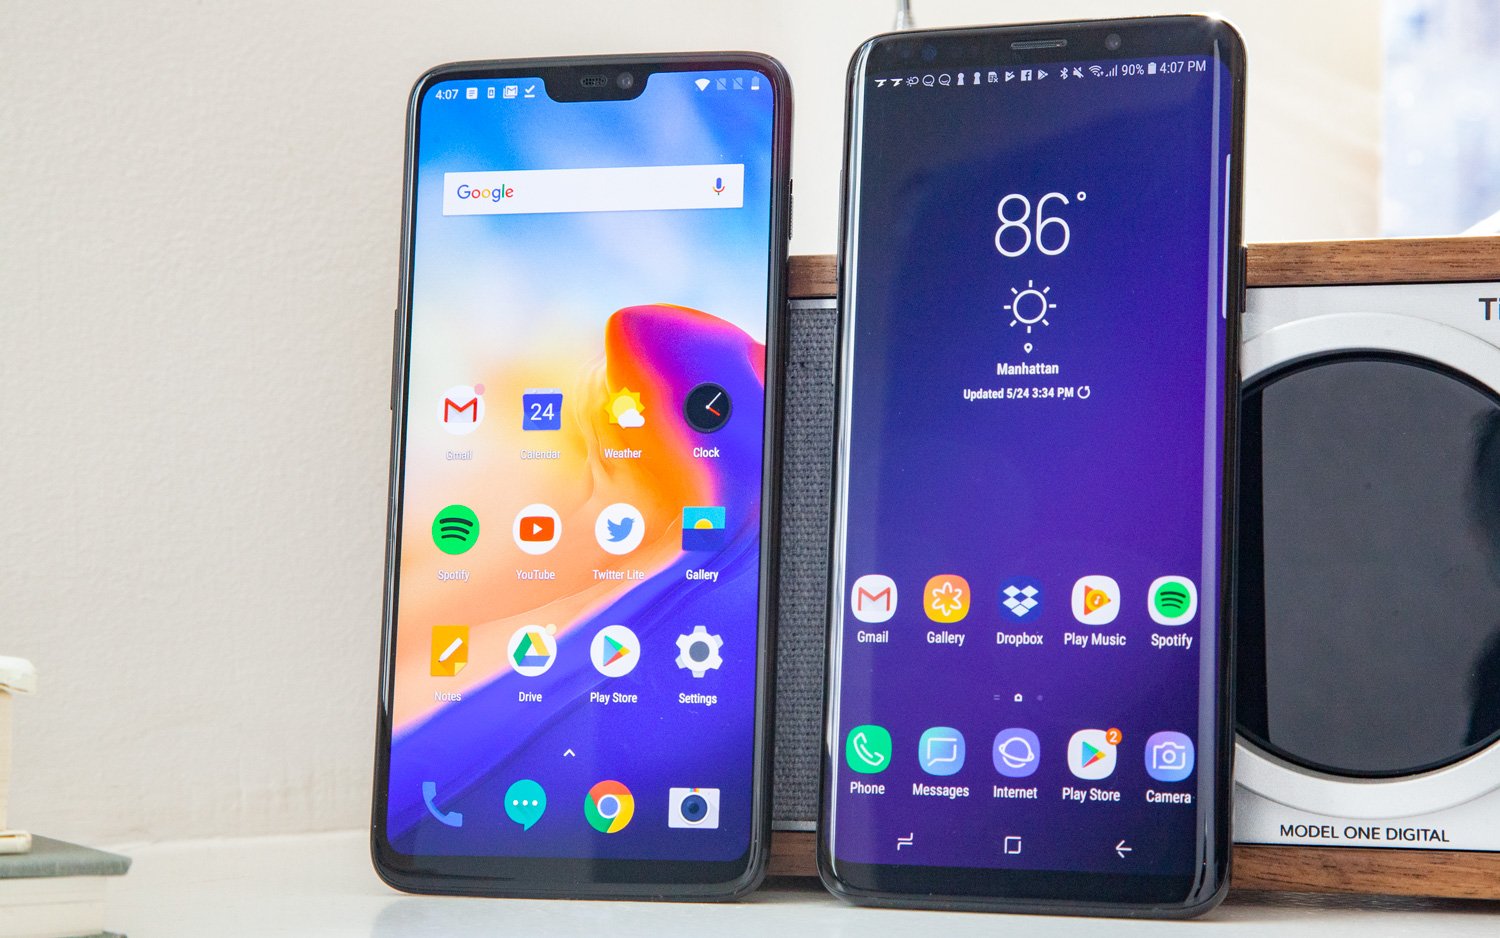 oneplus-6-vs-samsung-galaxy-s9-plus-which-big-phone-is-better